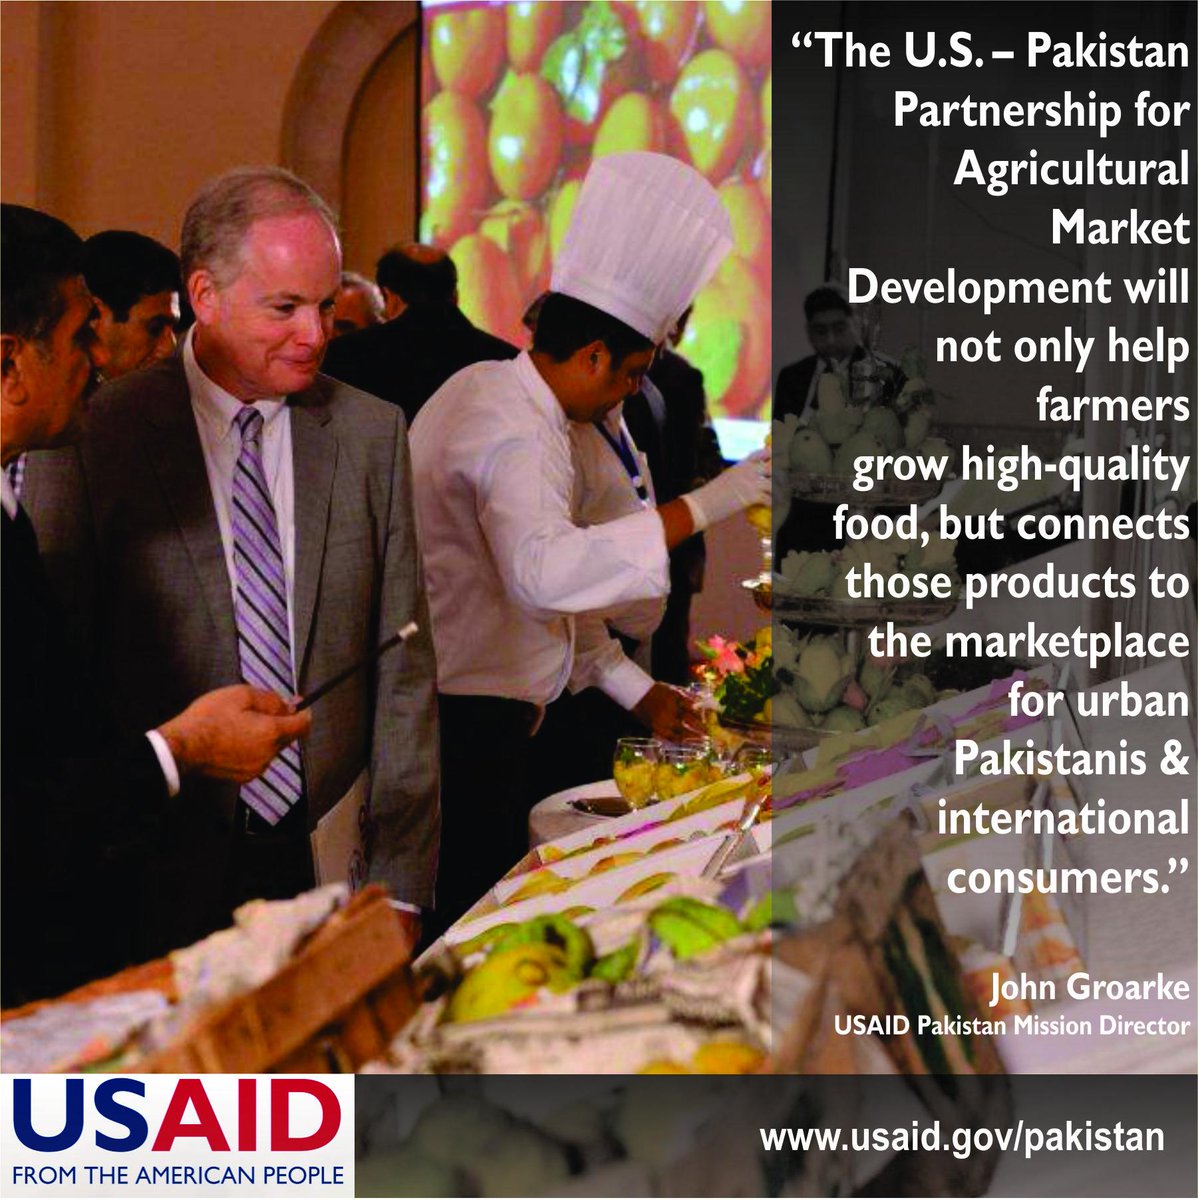 New Mission Director #USAID launched US–Pakistan Partnership for Agricultural Market Development #AgriculturalMarkets